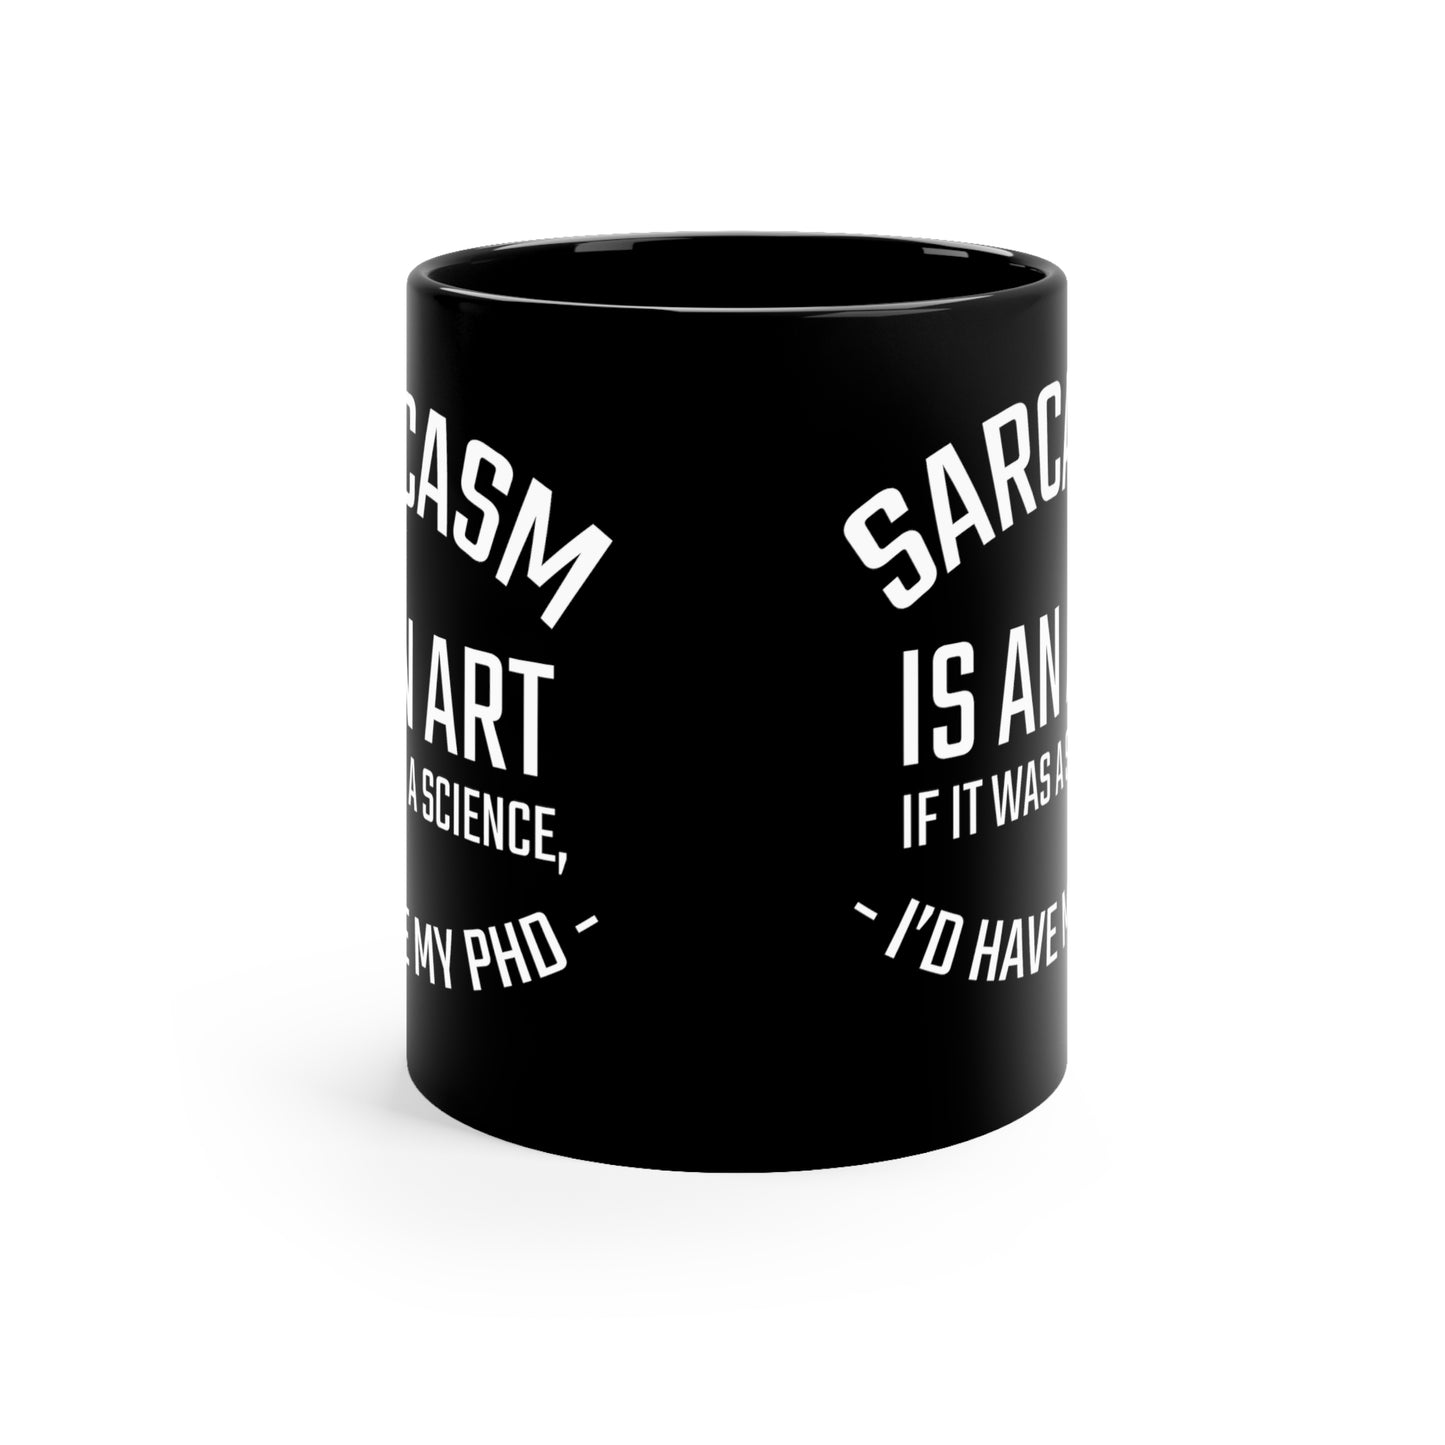 Sarcasm Is An Art PHD Coffee mug, Sarcastic Funny Sassy Office Gift Work Colleague Coworker Boss Him Her Friend 11oz Ceramic Cup